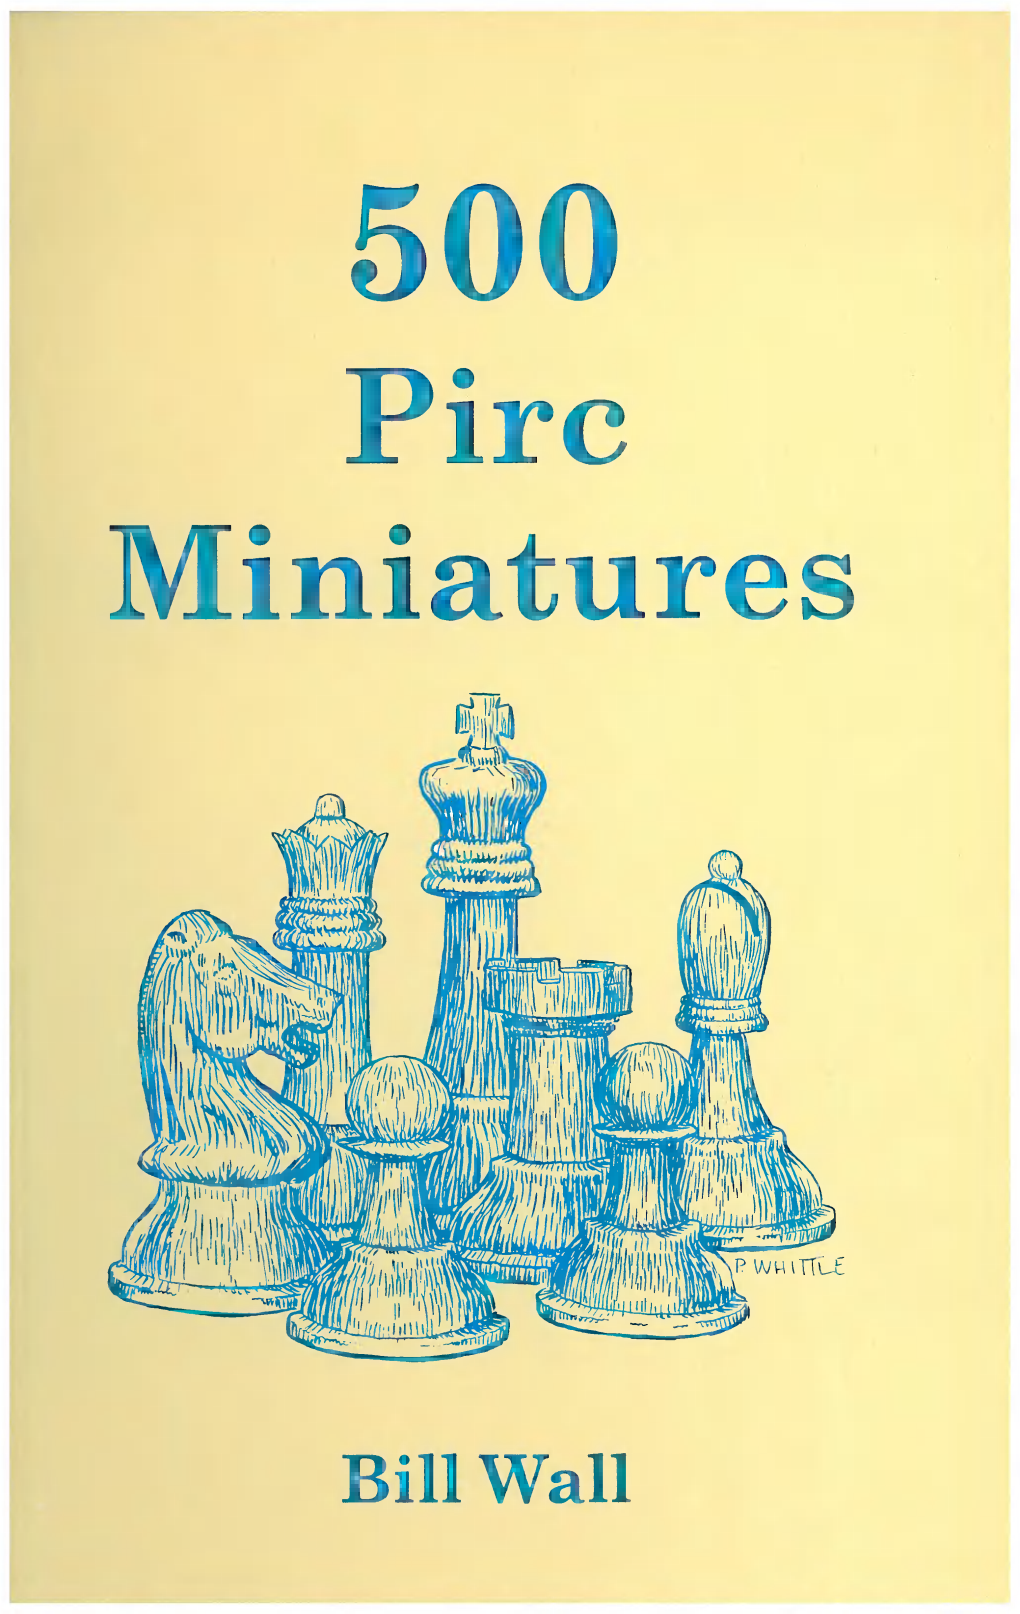 Bill Wall's Chess Page